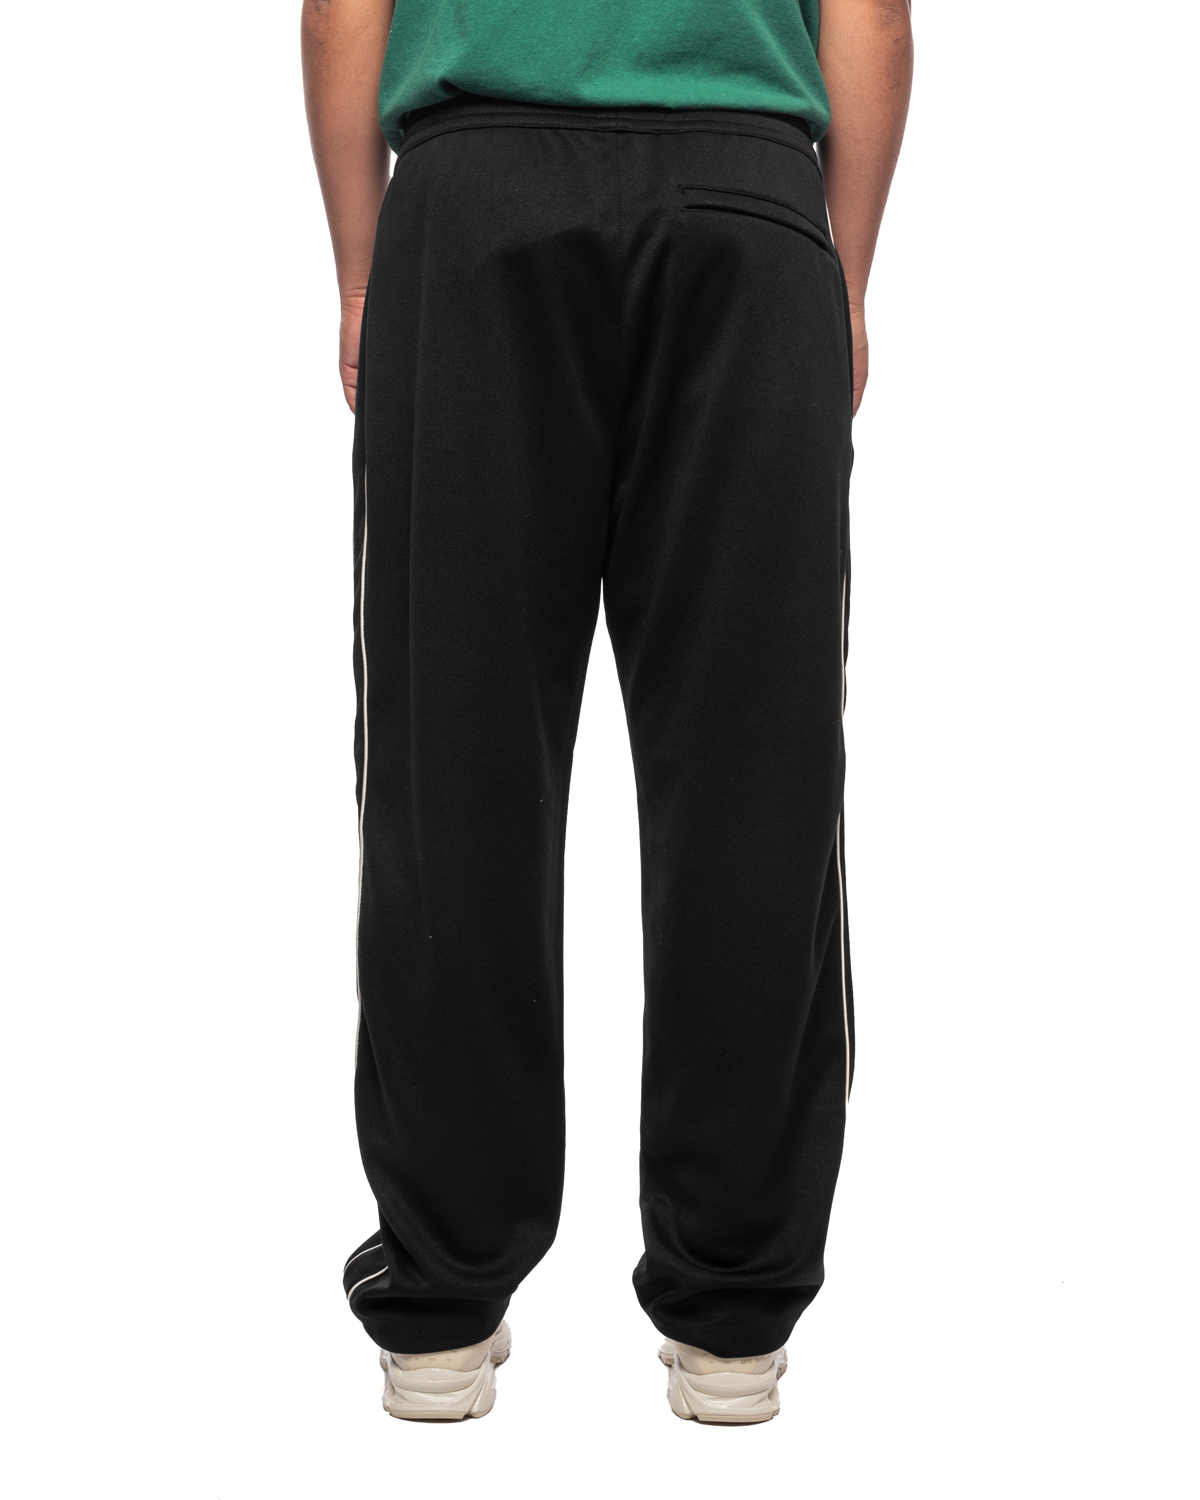 Star "A" Embroidered Track Pant Black